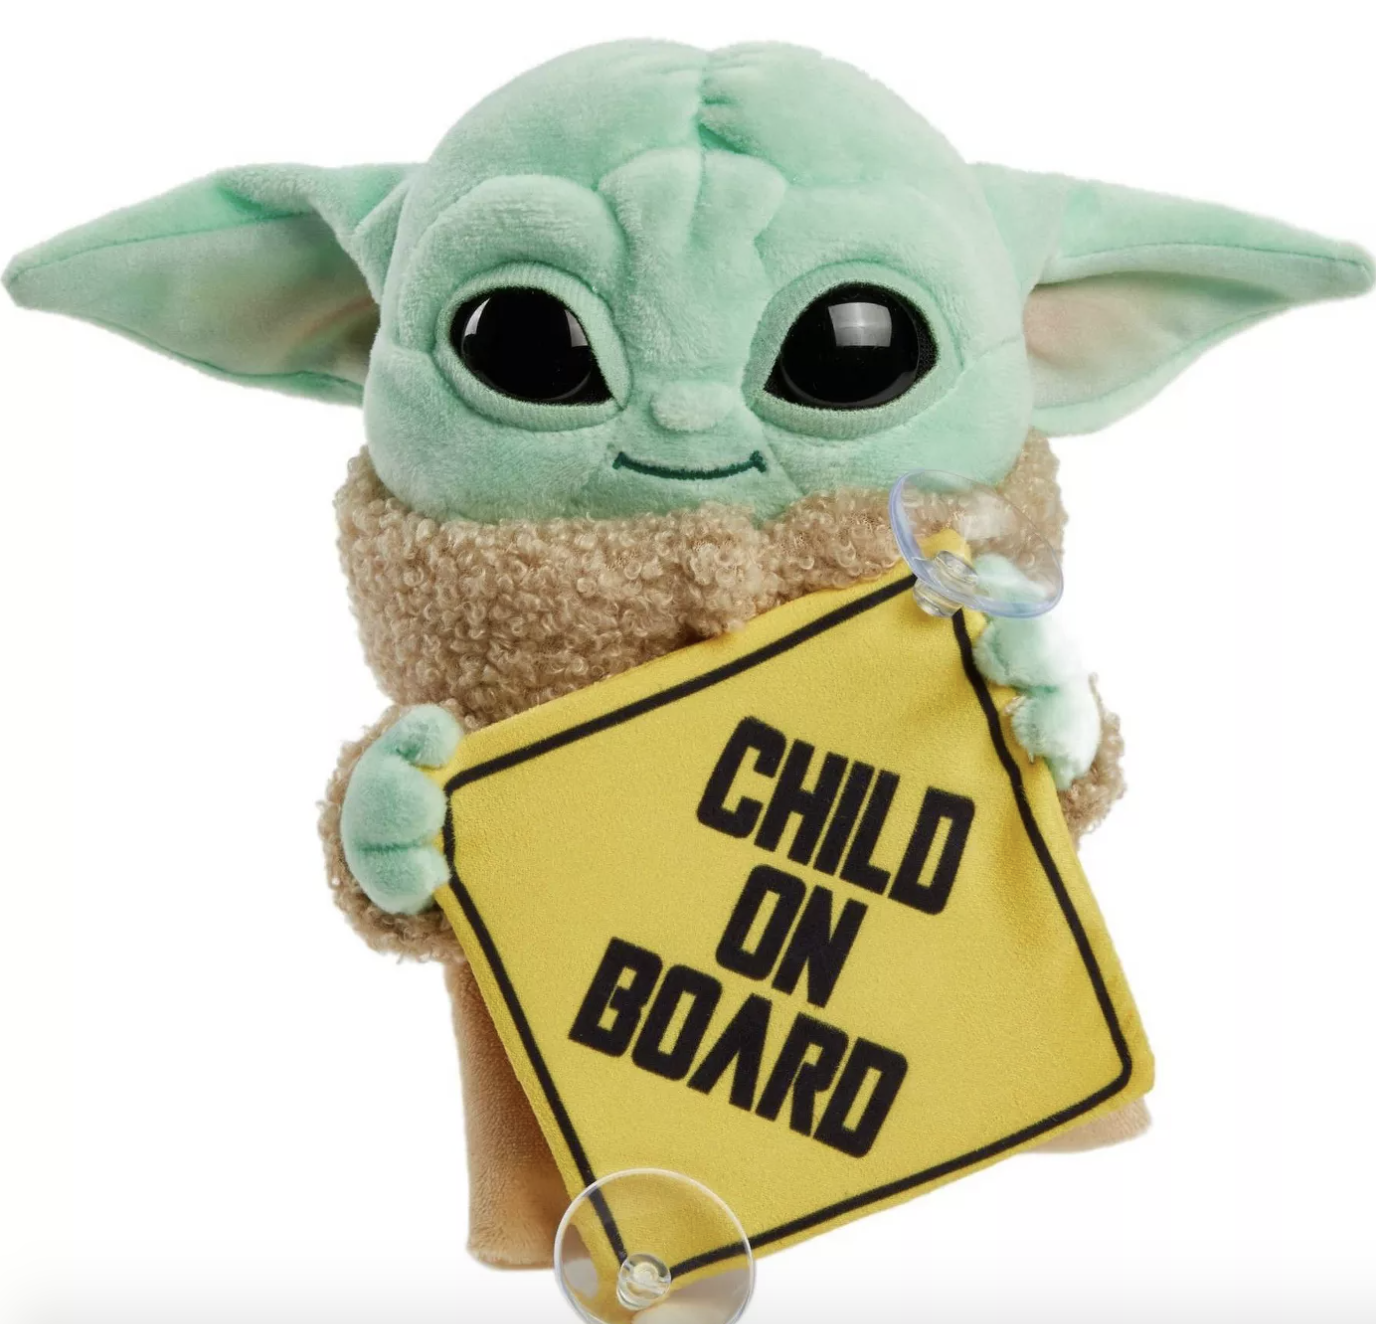 a plus baby yoda doll holding a yellow sign that says &quot;child on board&quot;